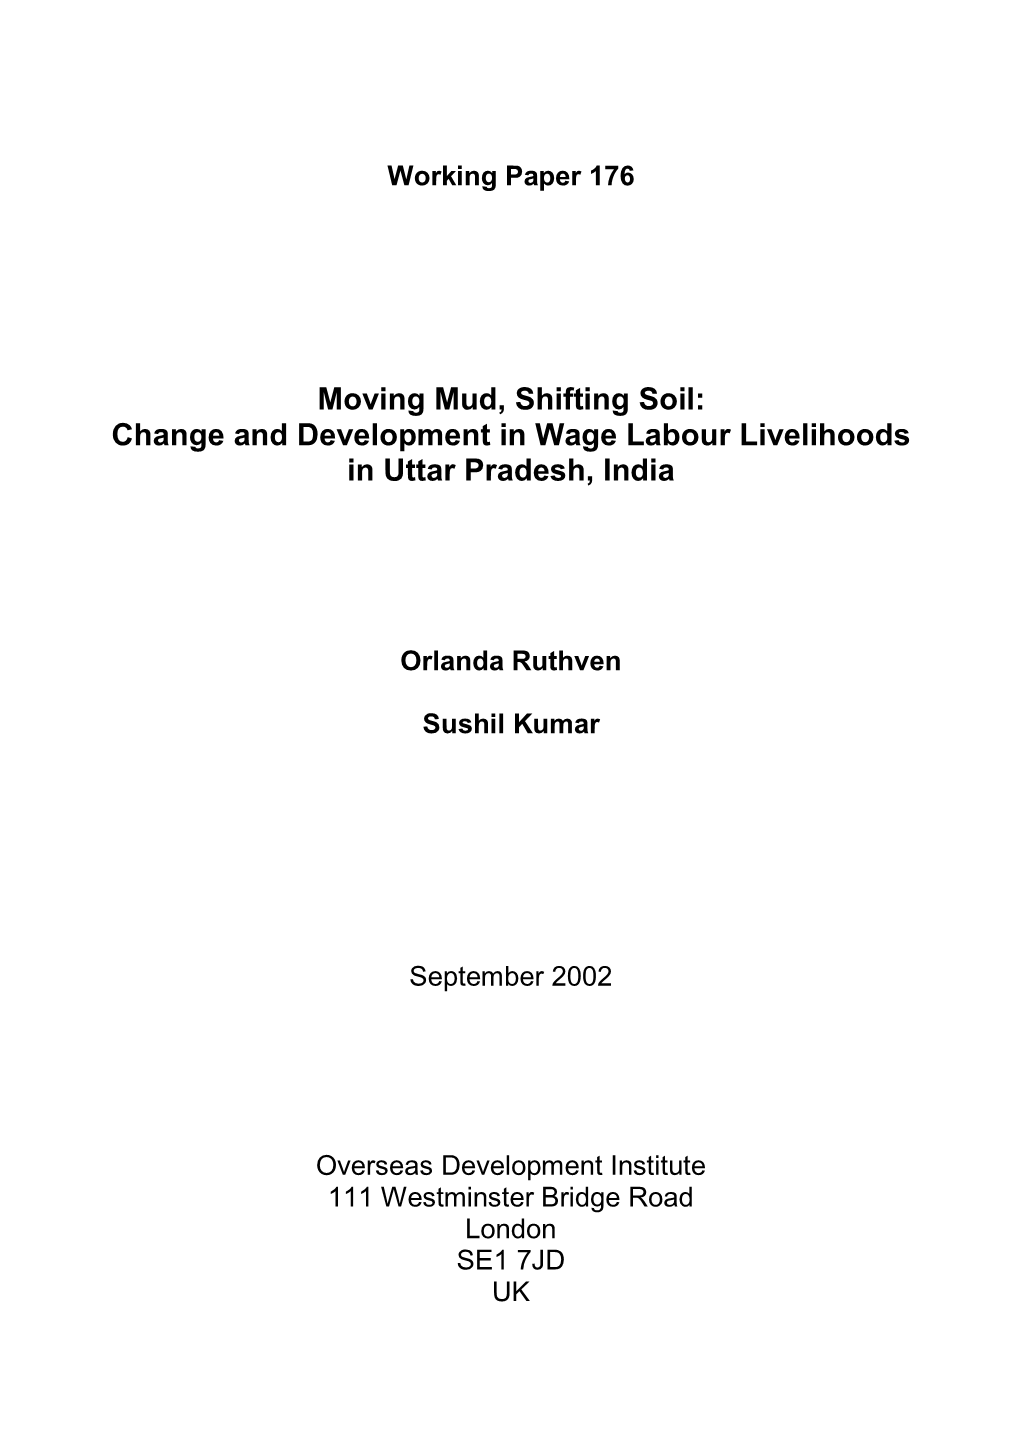 Moving Mud, Shifting Soil: Change and Development in Wage Labour Livelihoods in Uttar Pradesh, India